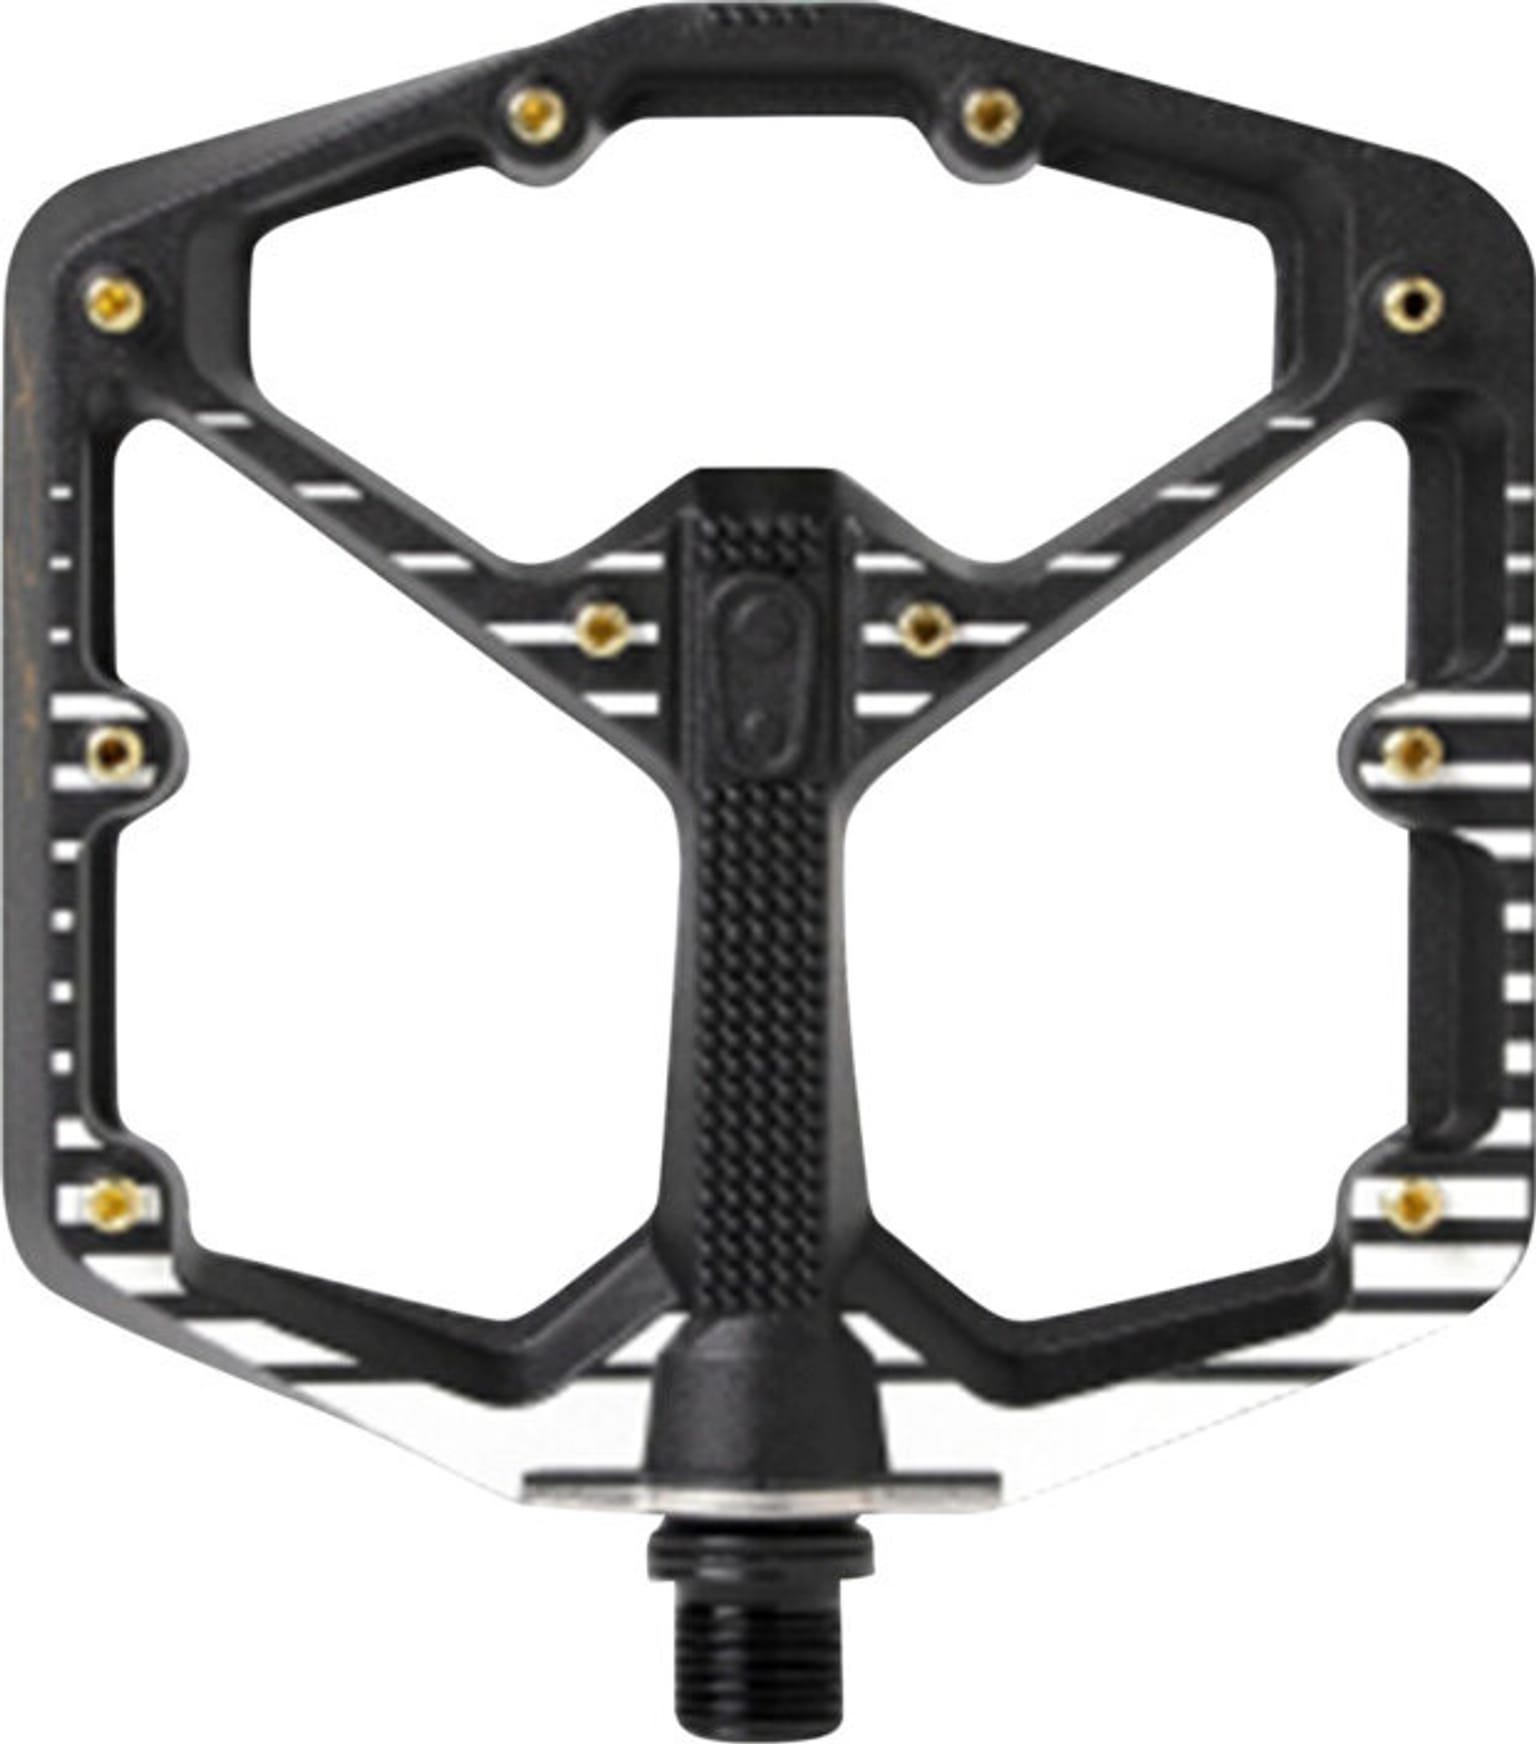 crankbrothers crankbrothers Pedal Stamp 7 large Fabio Wibmer Signature Edition Pedale noir 2